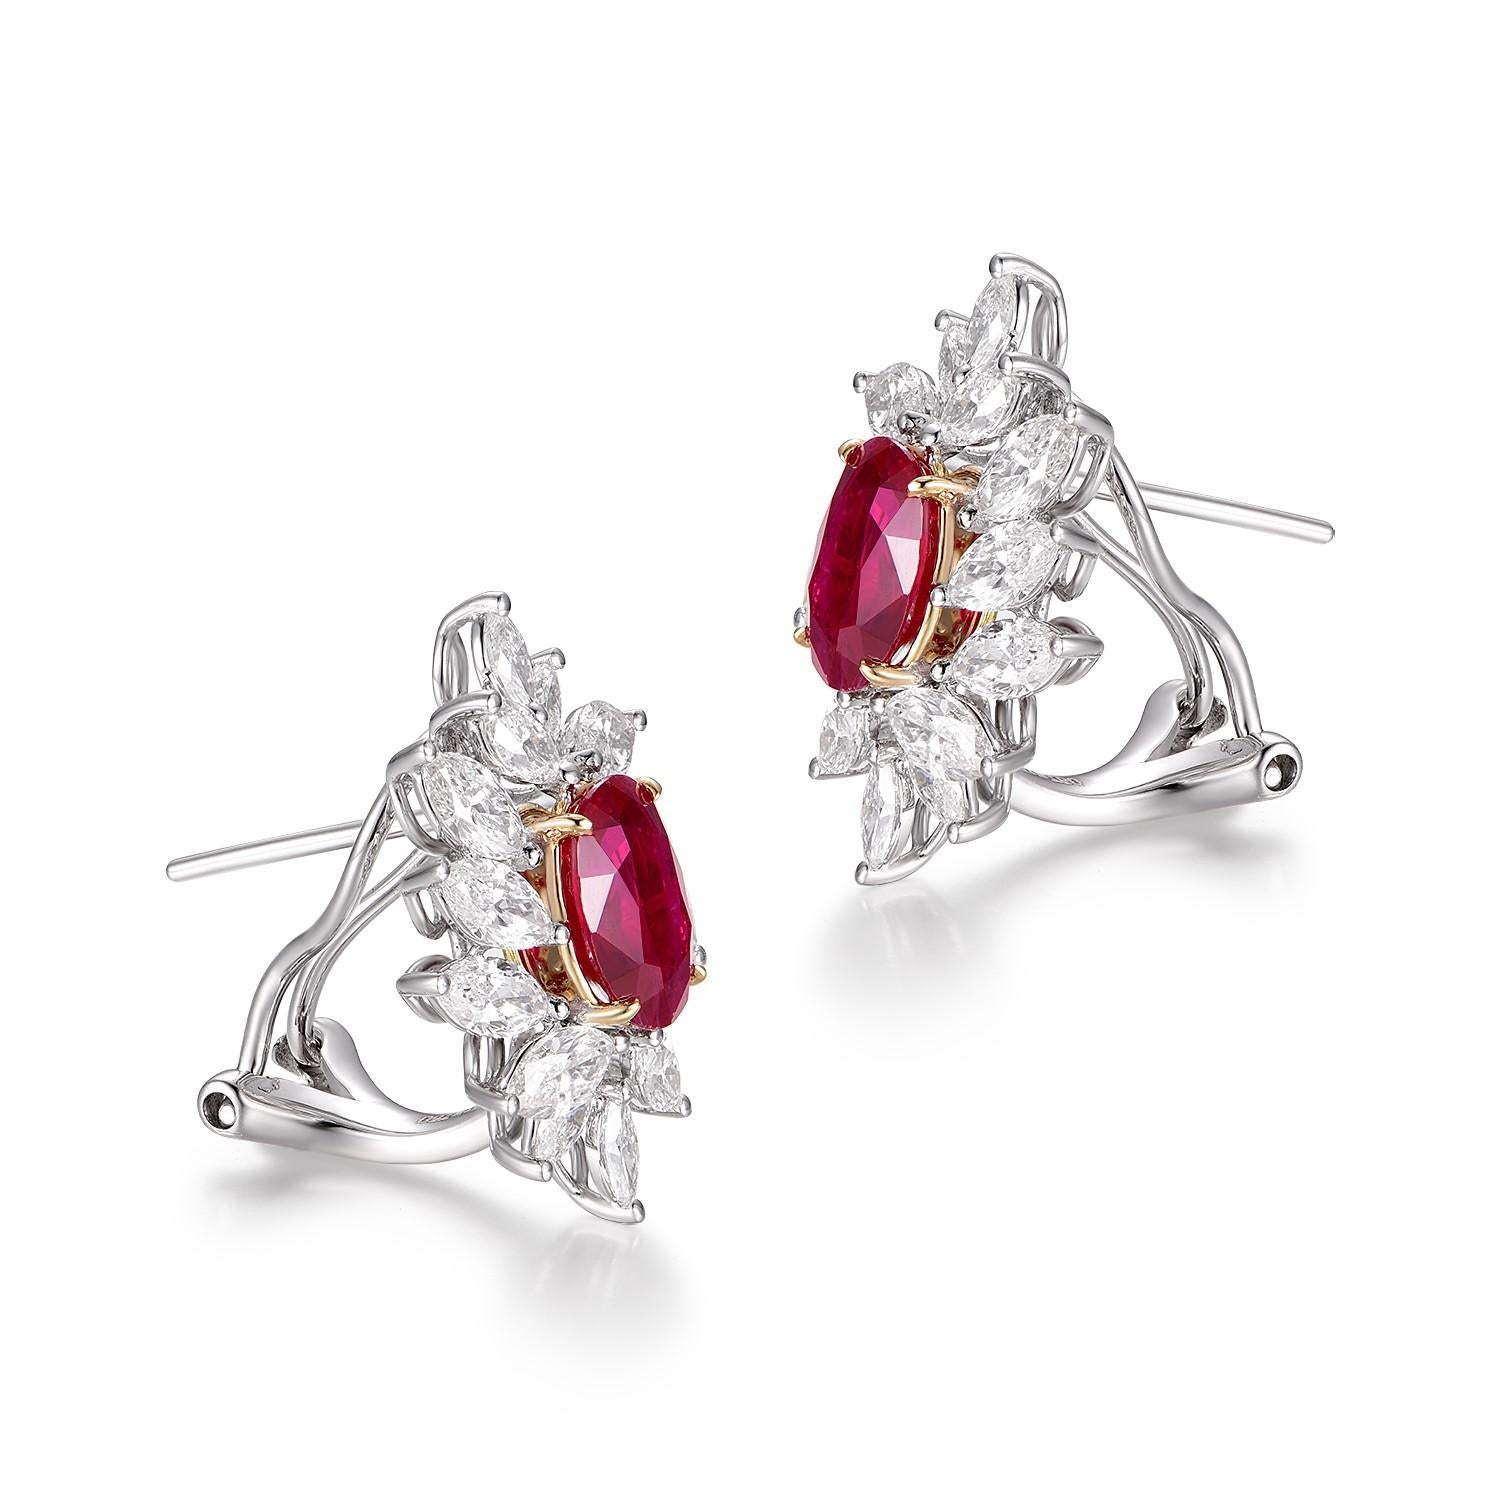 A striking embodiment of luxury and elegance, these exquisite earrings are truly a masterpiece in the realm of fine jewelry. Crafted meticulously from 18K white gold, they showcase the richness and depth of a captivating 2.98ct Burma ruby, GIA